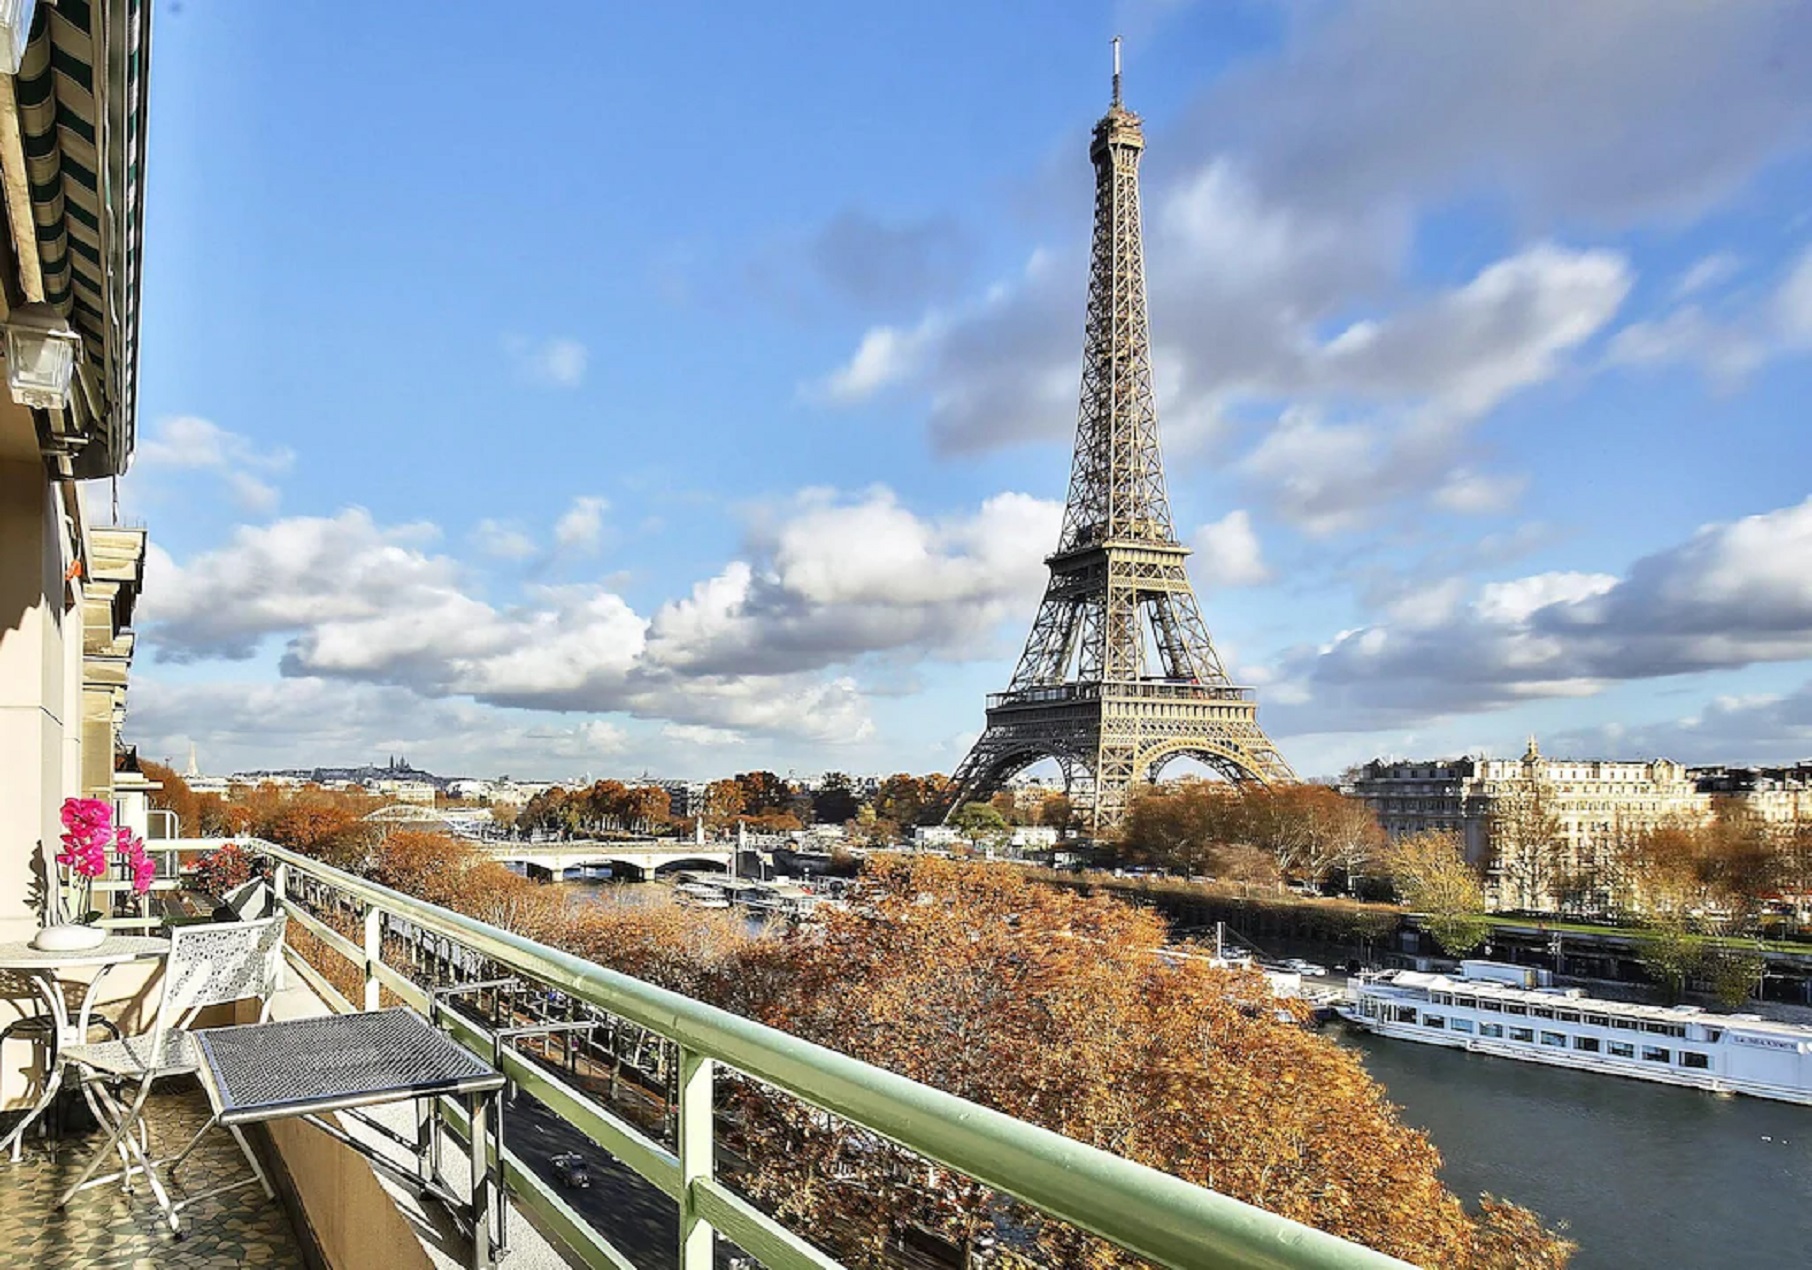 Eiffel Tower and Seine River View from Vacation Rental Balcony